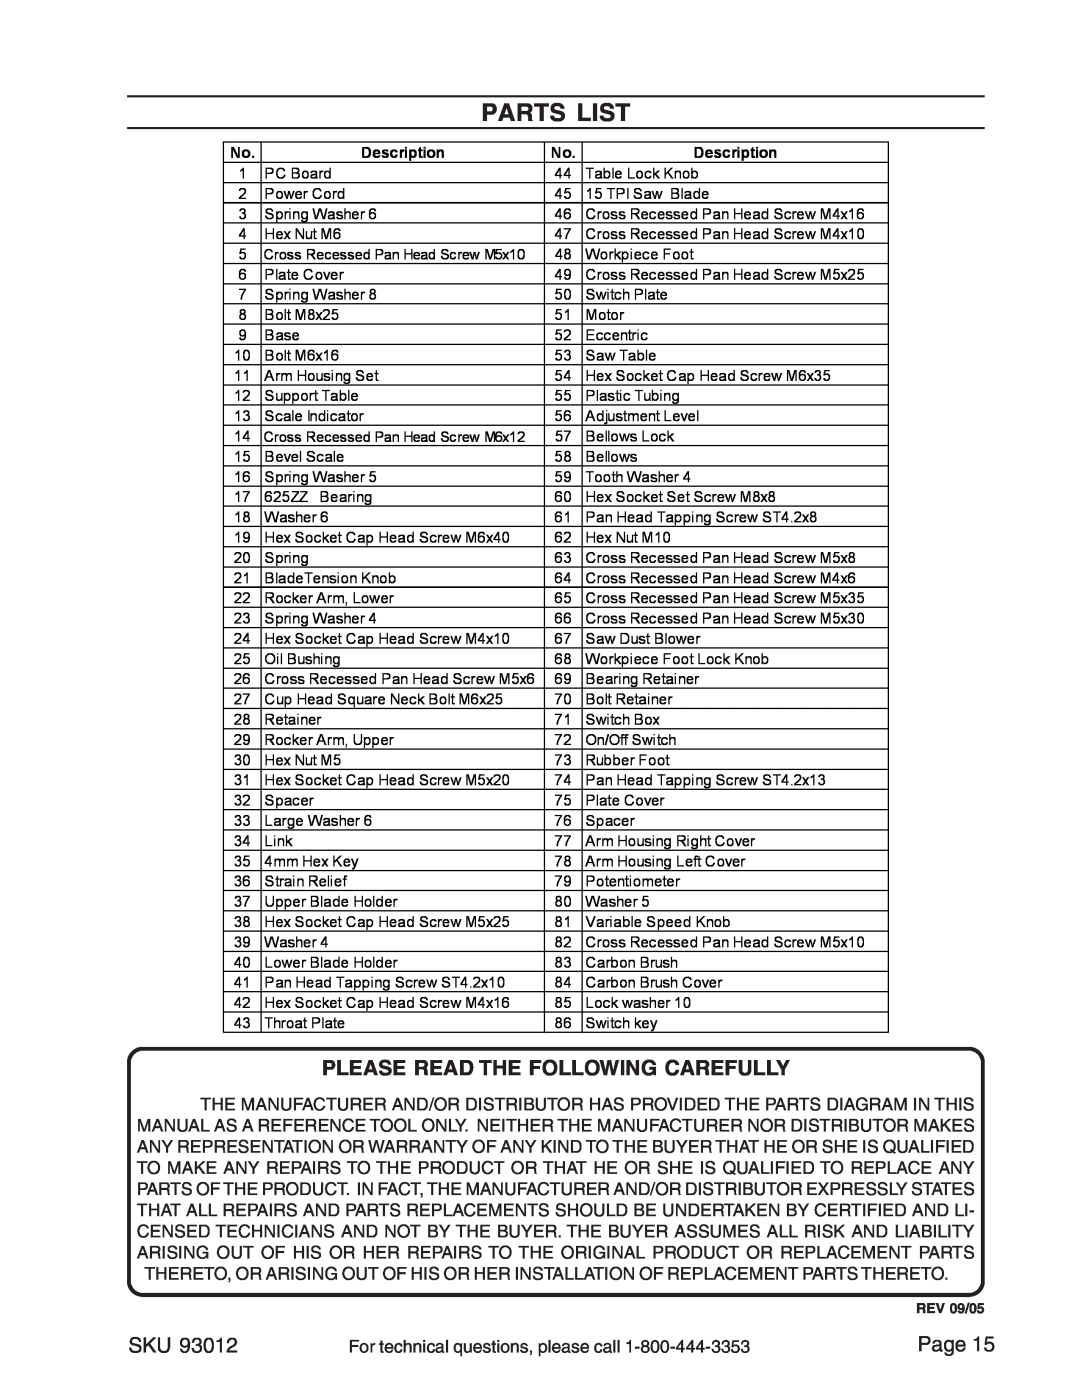 Harbor Freight Tools 93012 operating instructions Parts List, Please Read The Following Carefully 